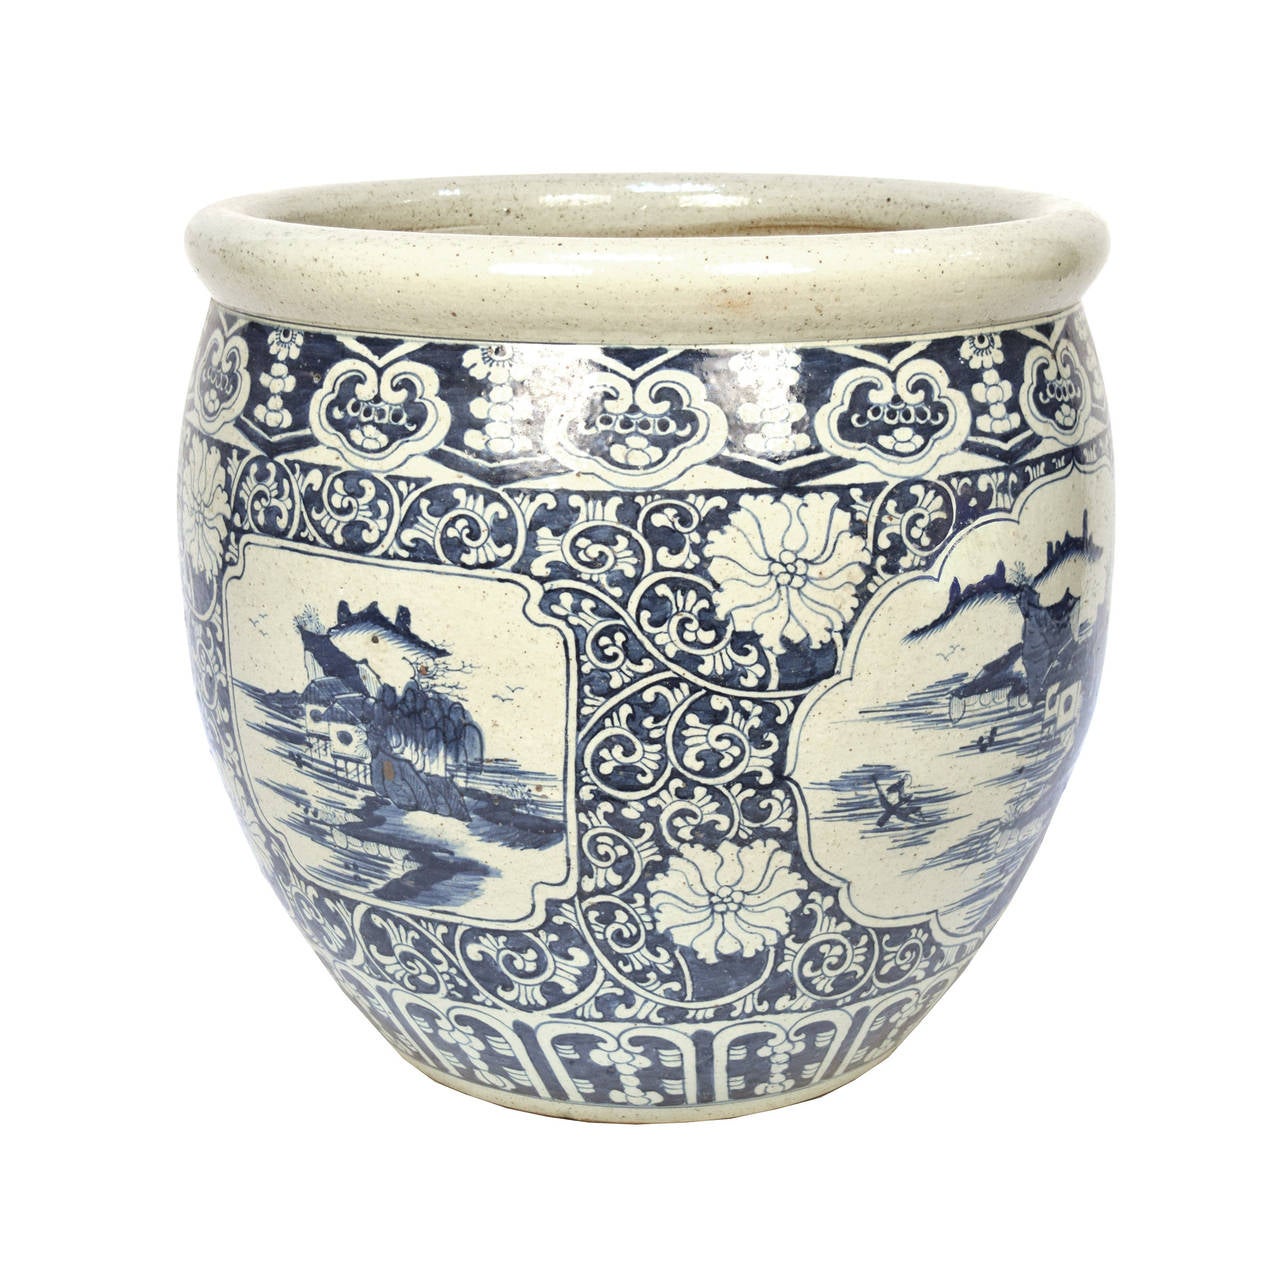 Blue and white porcelain fish bowl painted with a traditional river and mountain landscape scene.